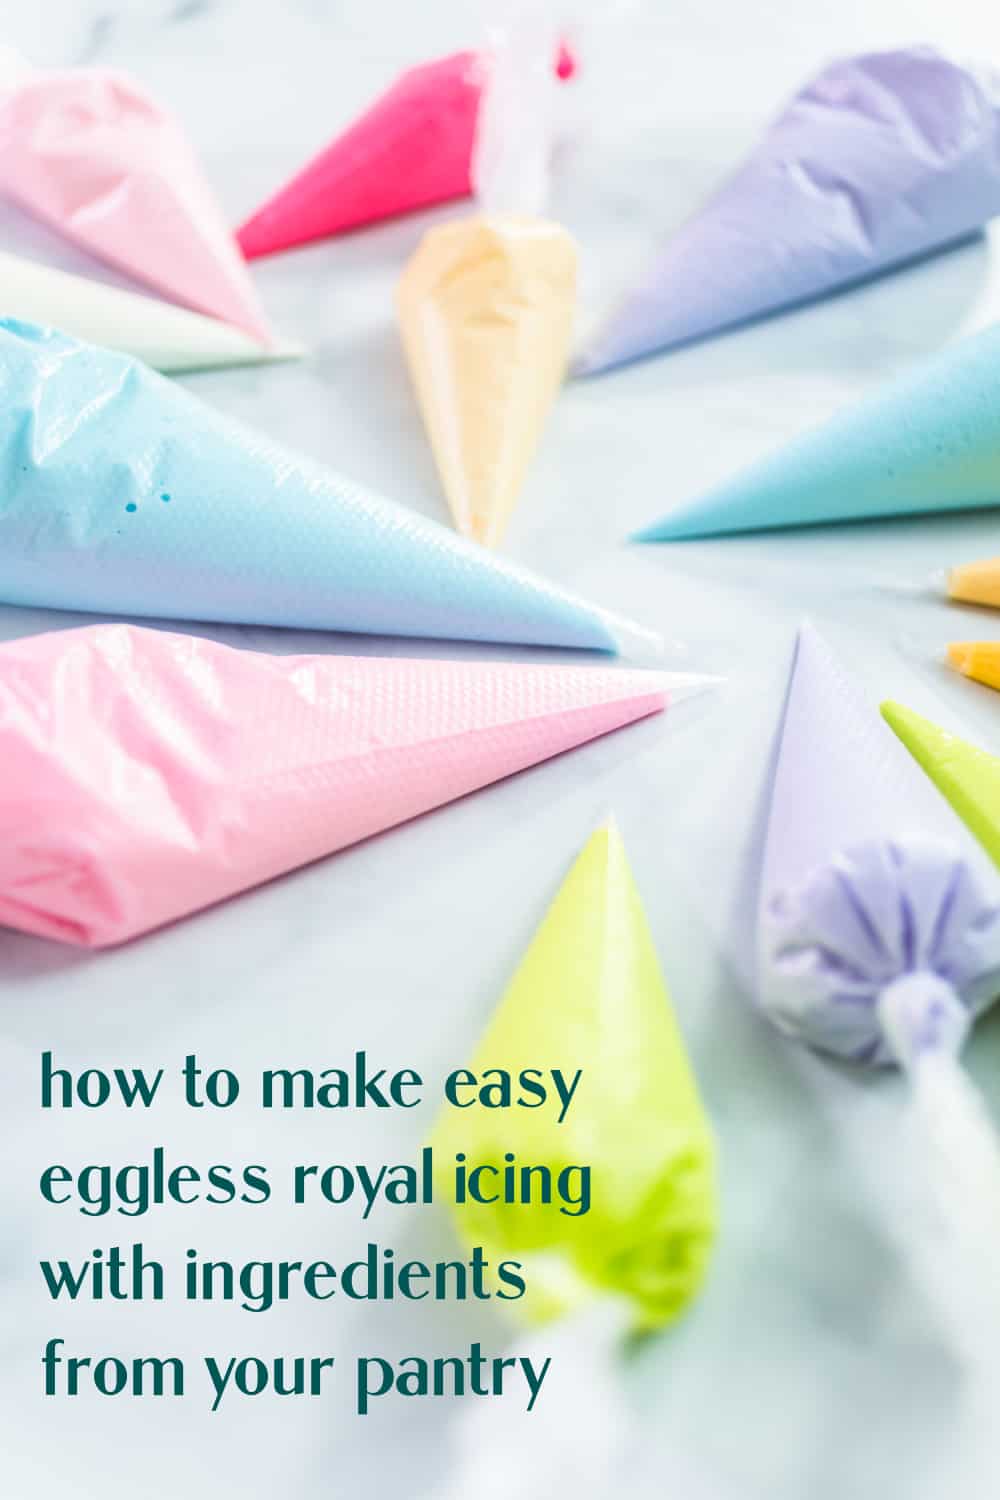 This Easy Vegan Royal Icing recipe is a cinch to make and takes just 4 ingredients you probably already have in your pantry! via @jugglingactmama